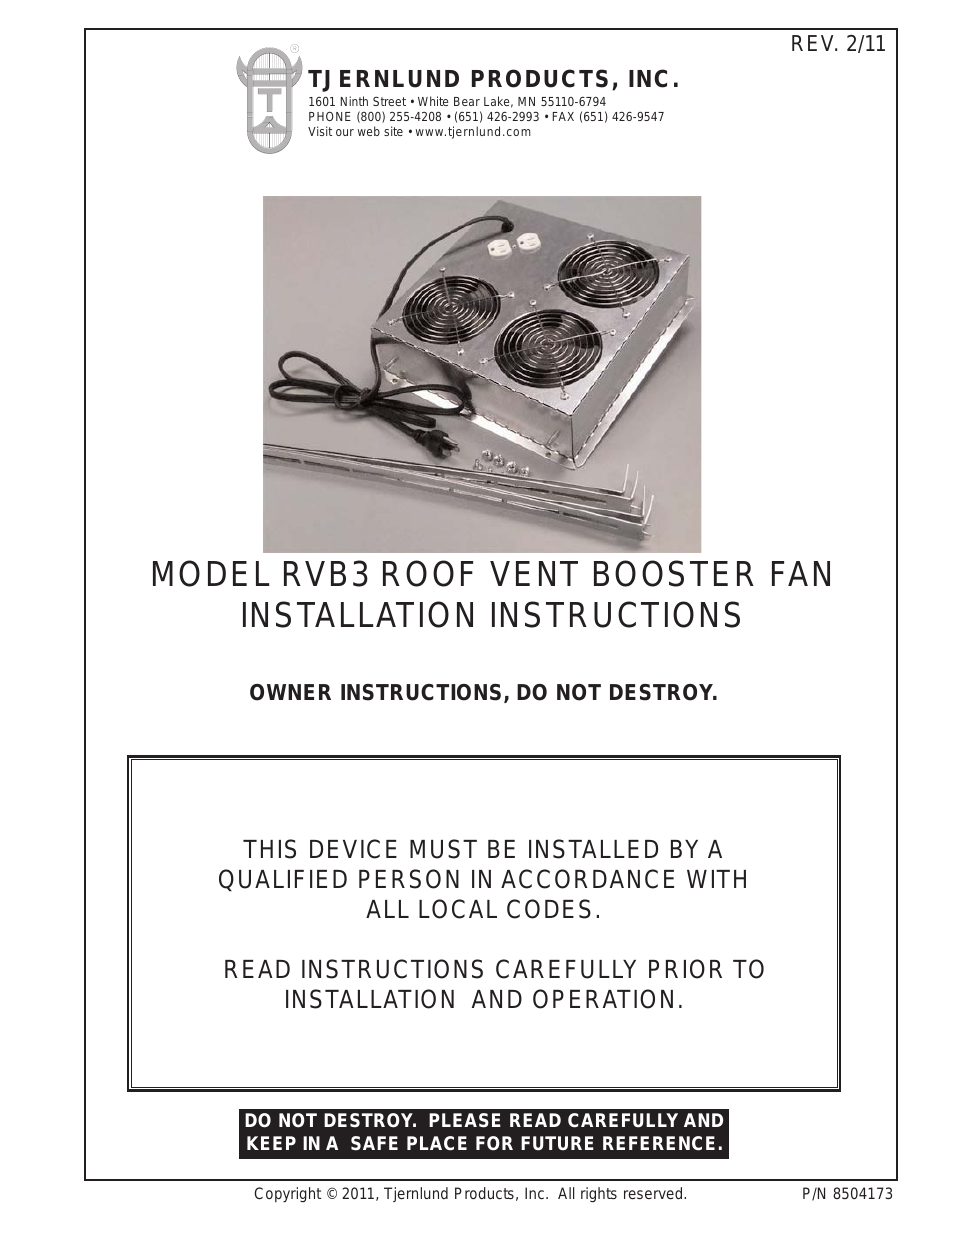 RVB3 Roof Vent Booster Fan 8504173 (Discontinued)